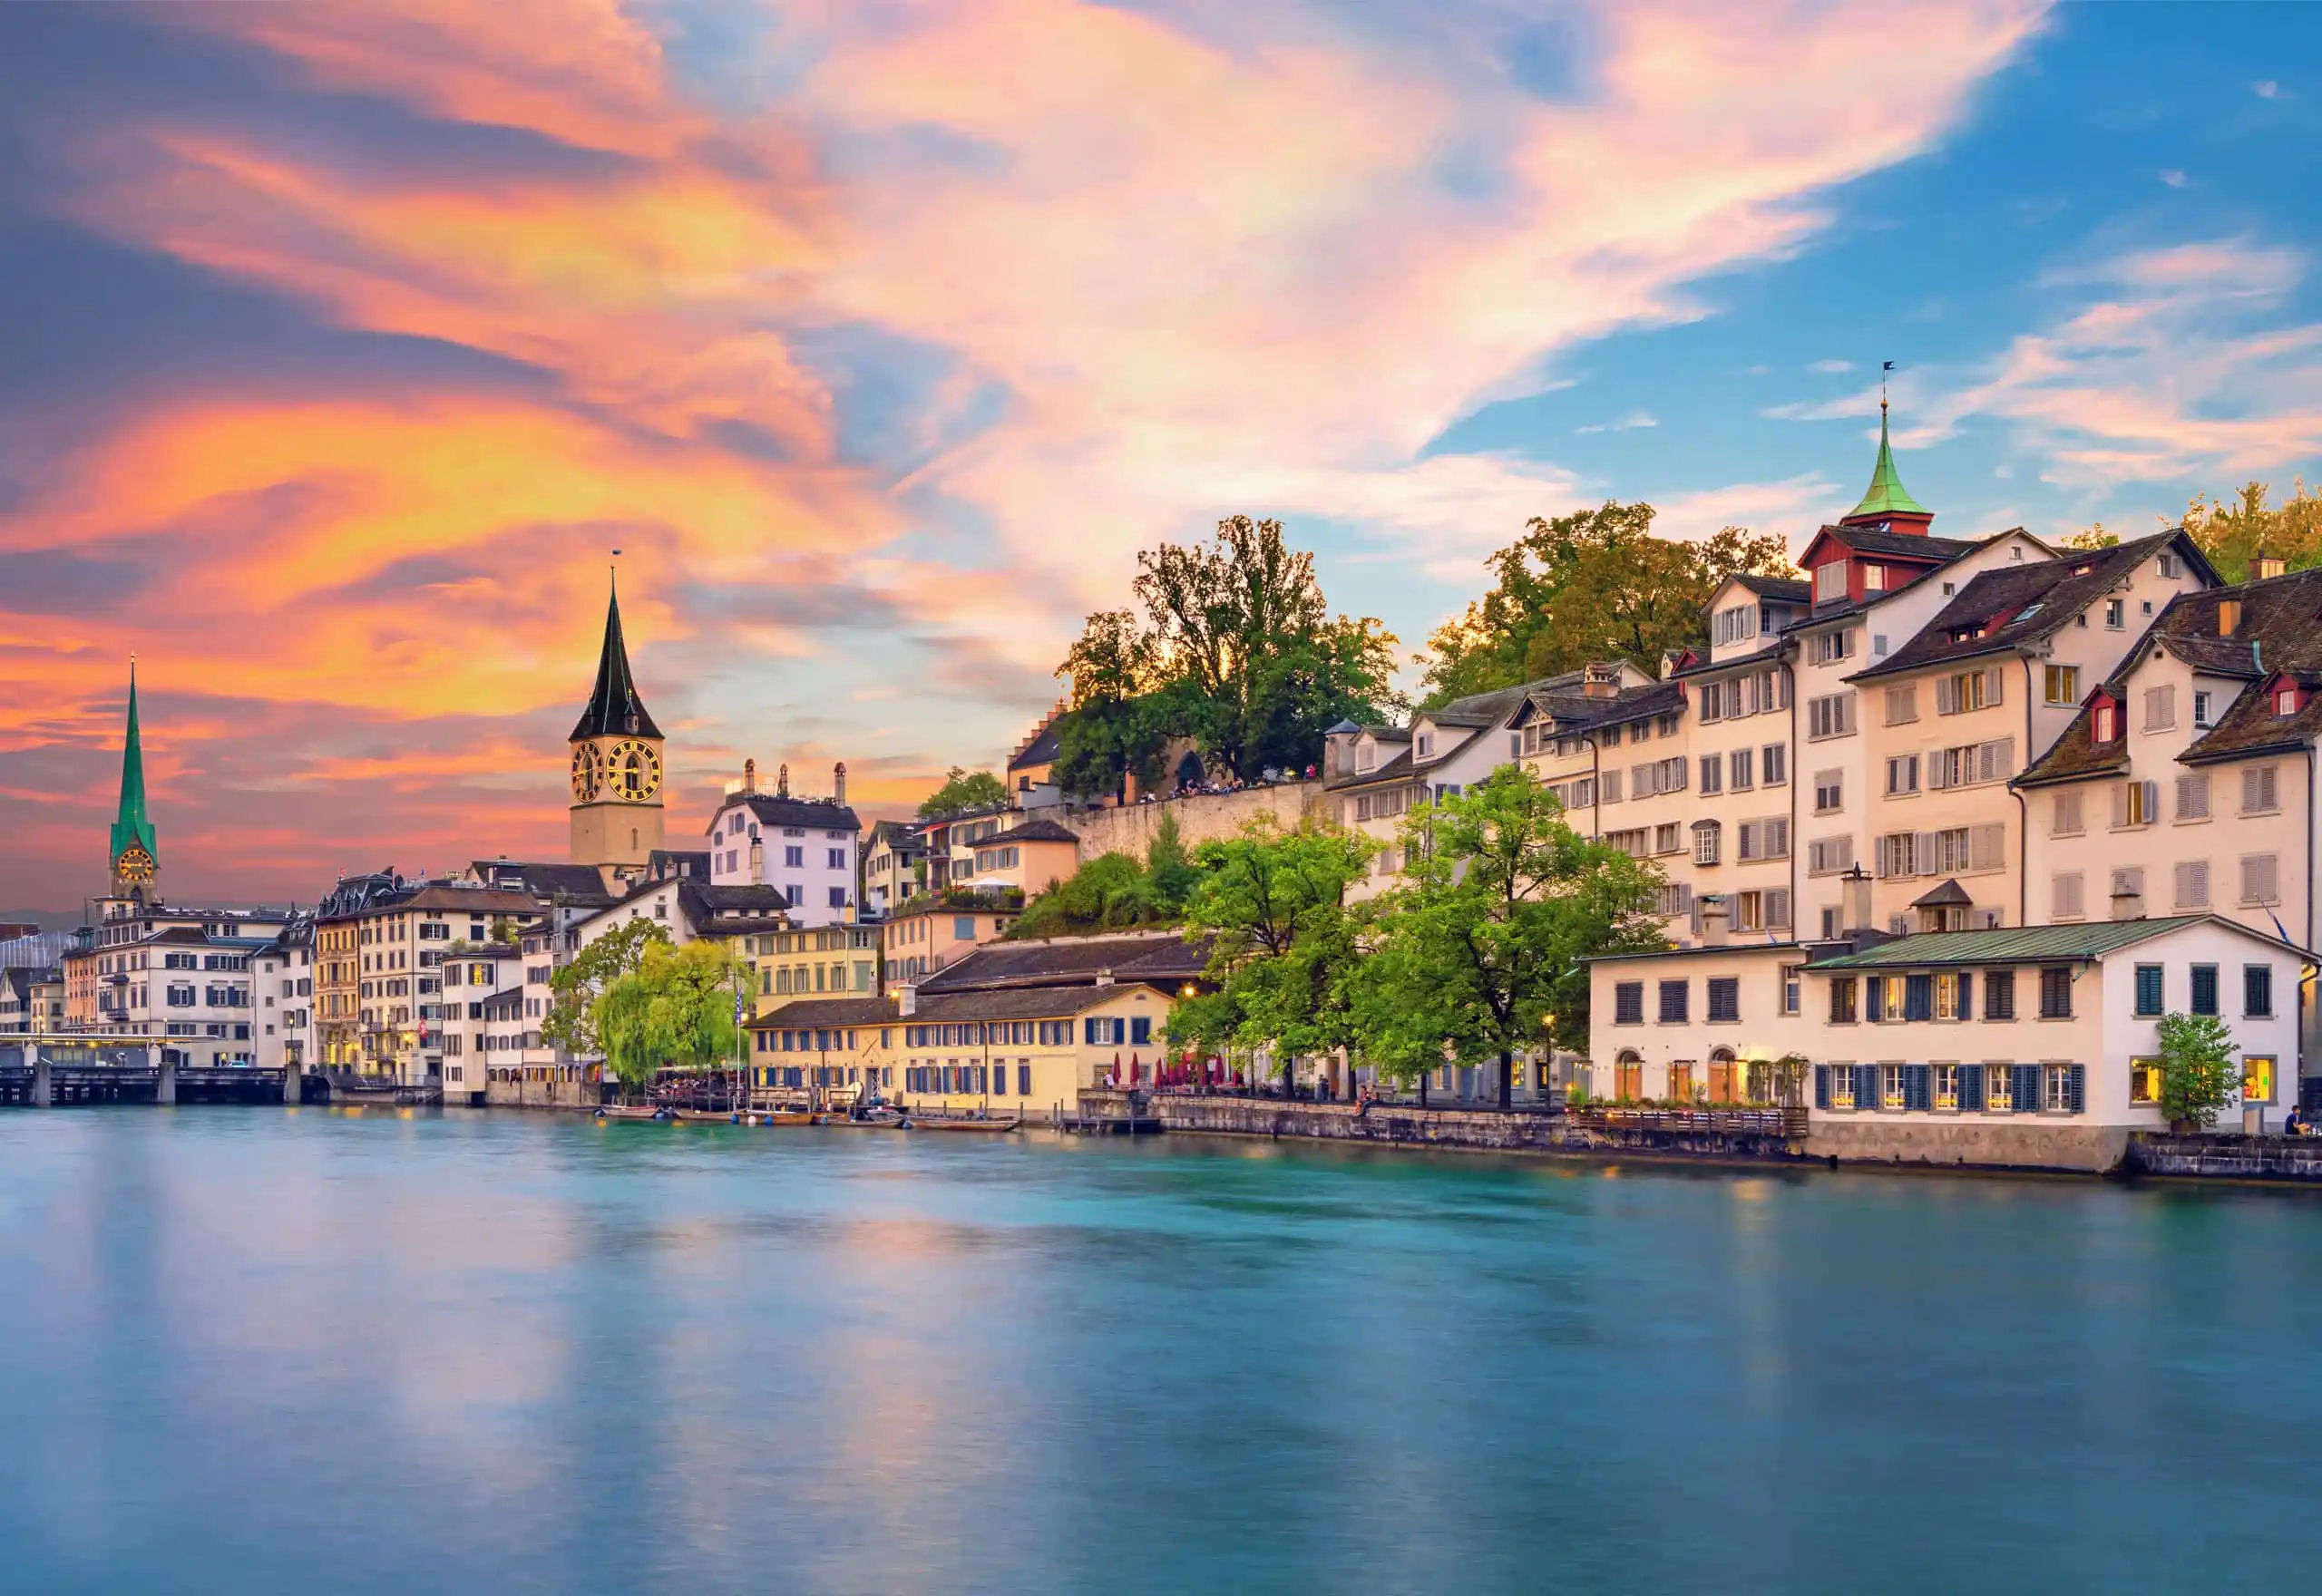 PR , Customer Services , Sales and Marketing Courses in Zurich